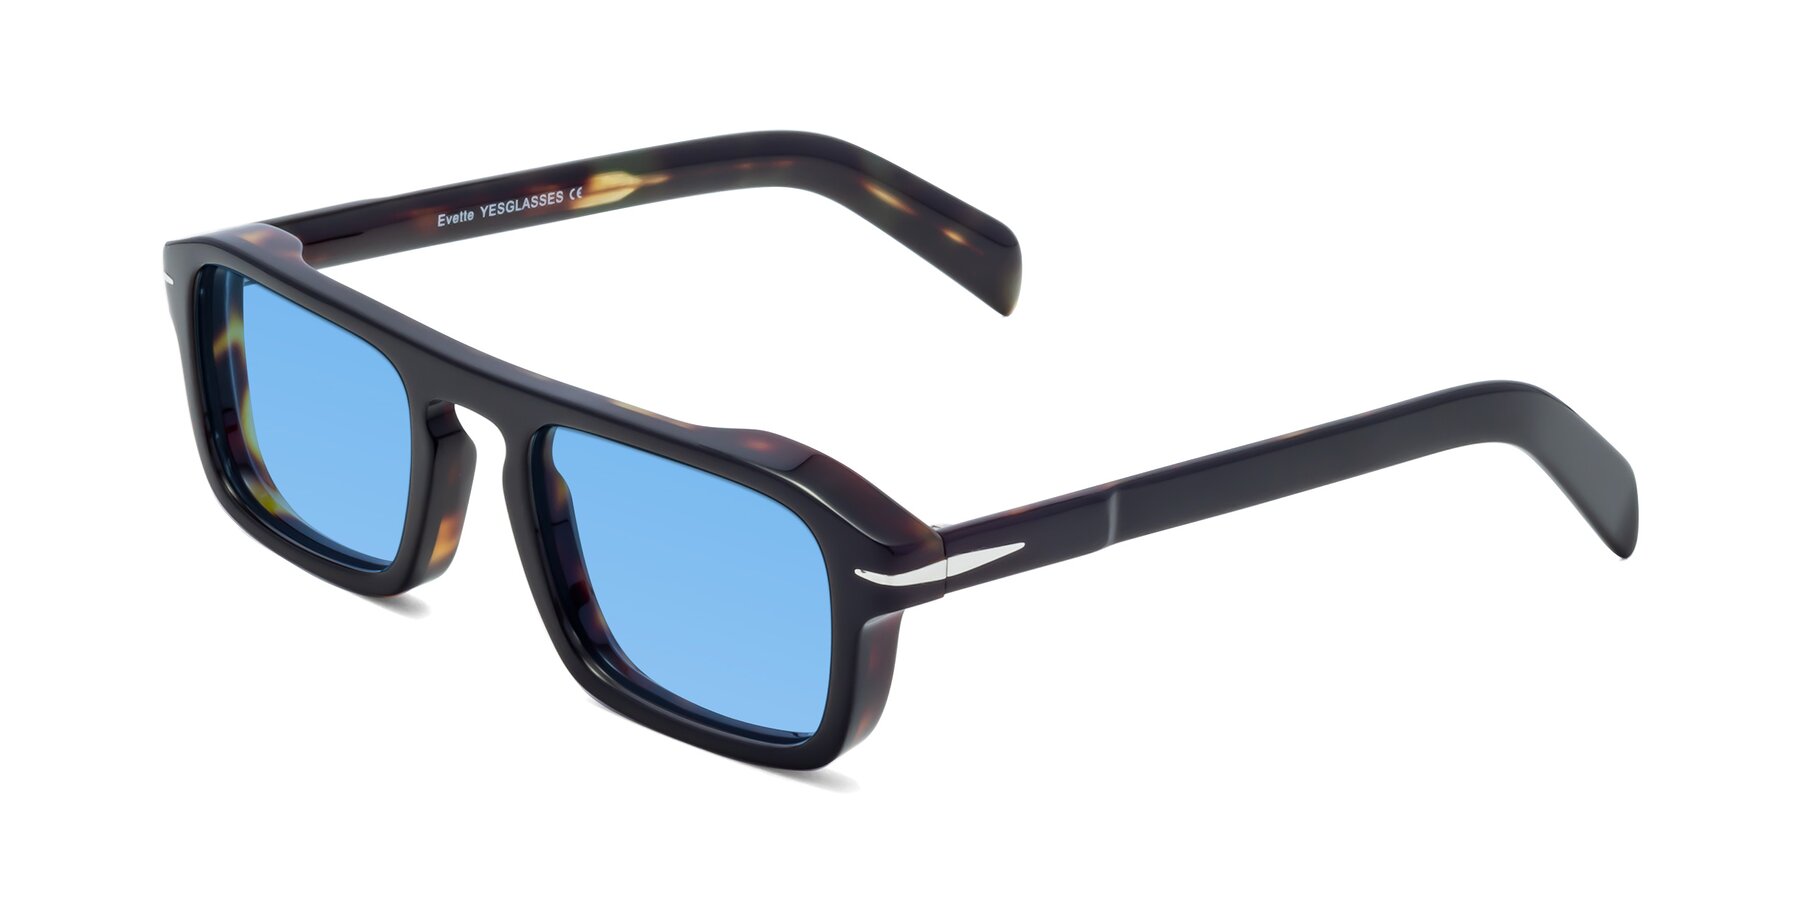 Angle of Evette in Black-Tortoise with Medium Blue Tinted Lenses